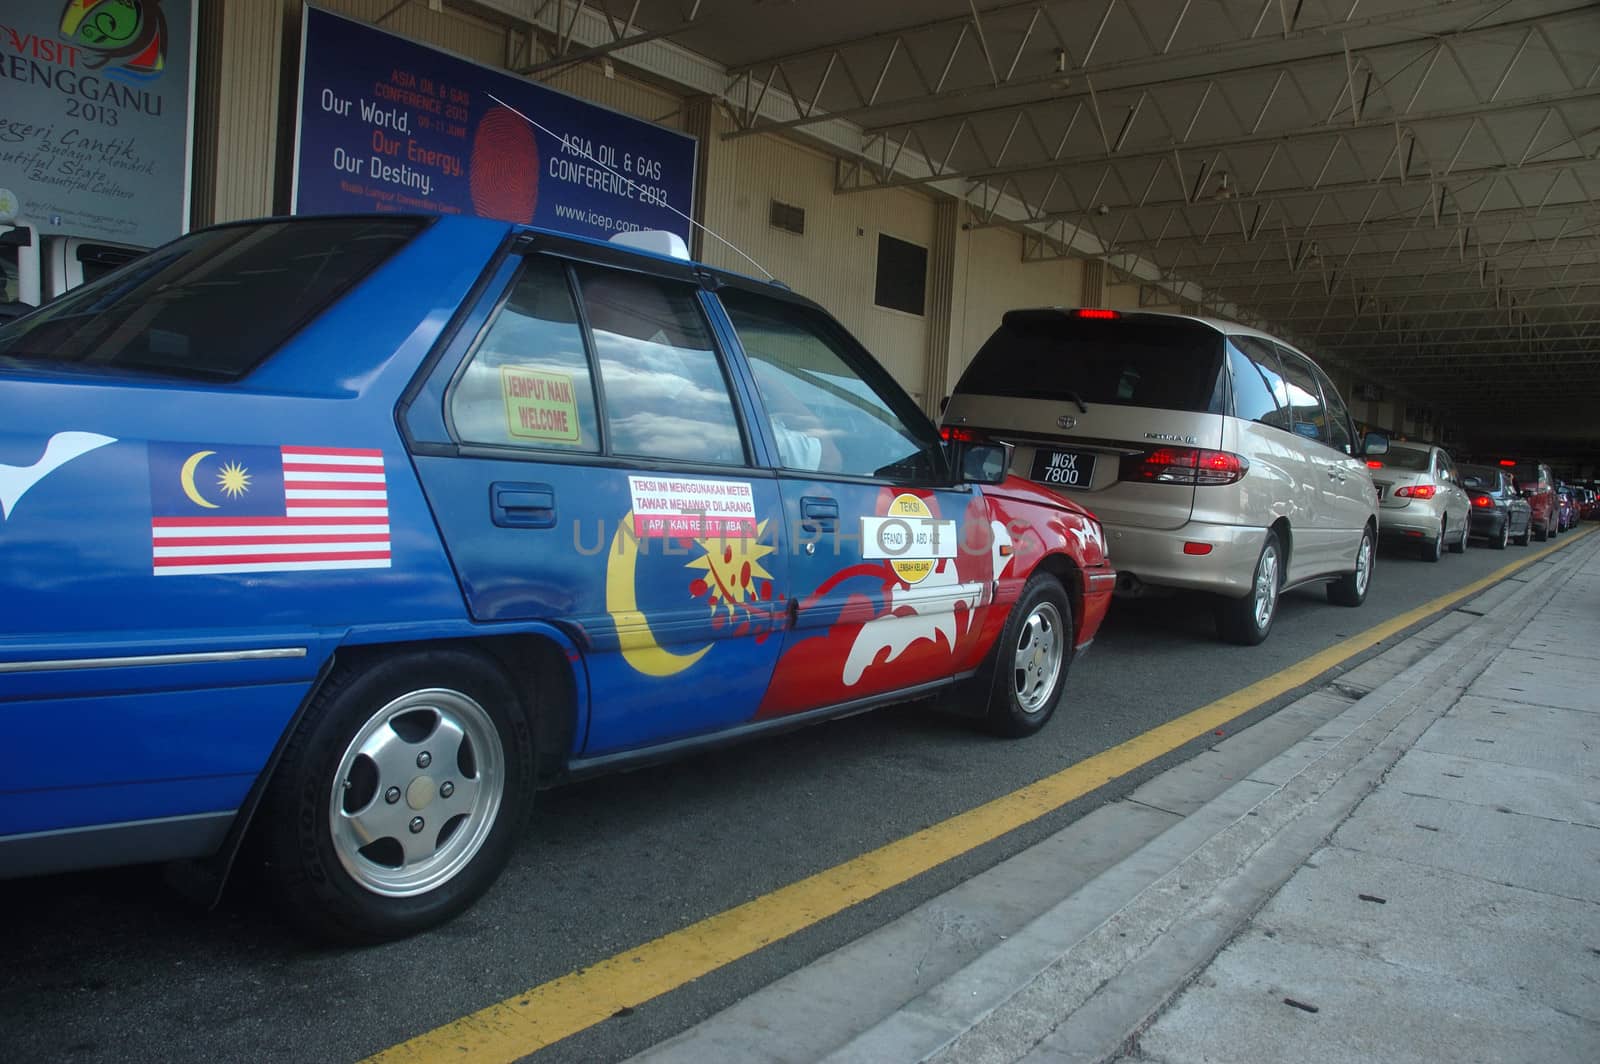 KLCCT, Malaysia - June 7, 2013: Blue colored taxi that operated in Kuala Lumpur Low Cost Carrier Terminal (KLCCT), Malaysia.